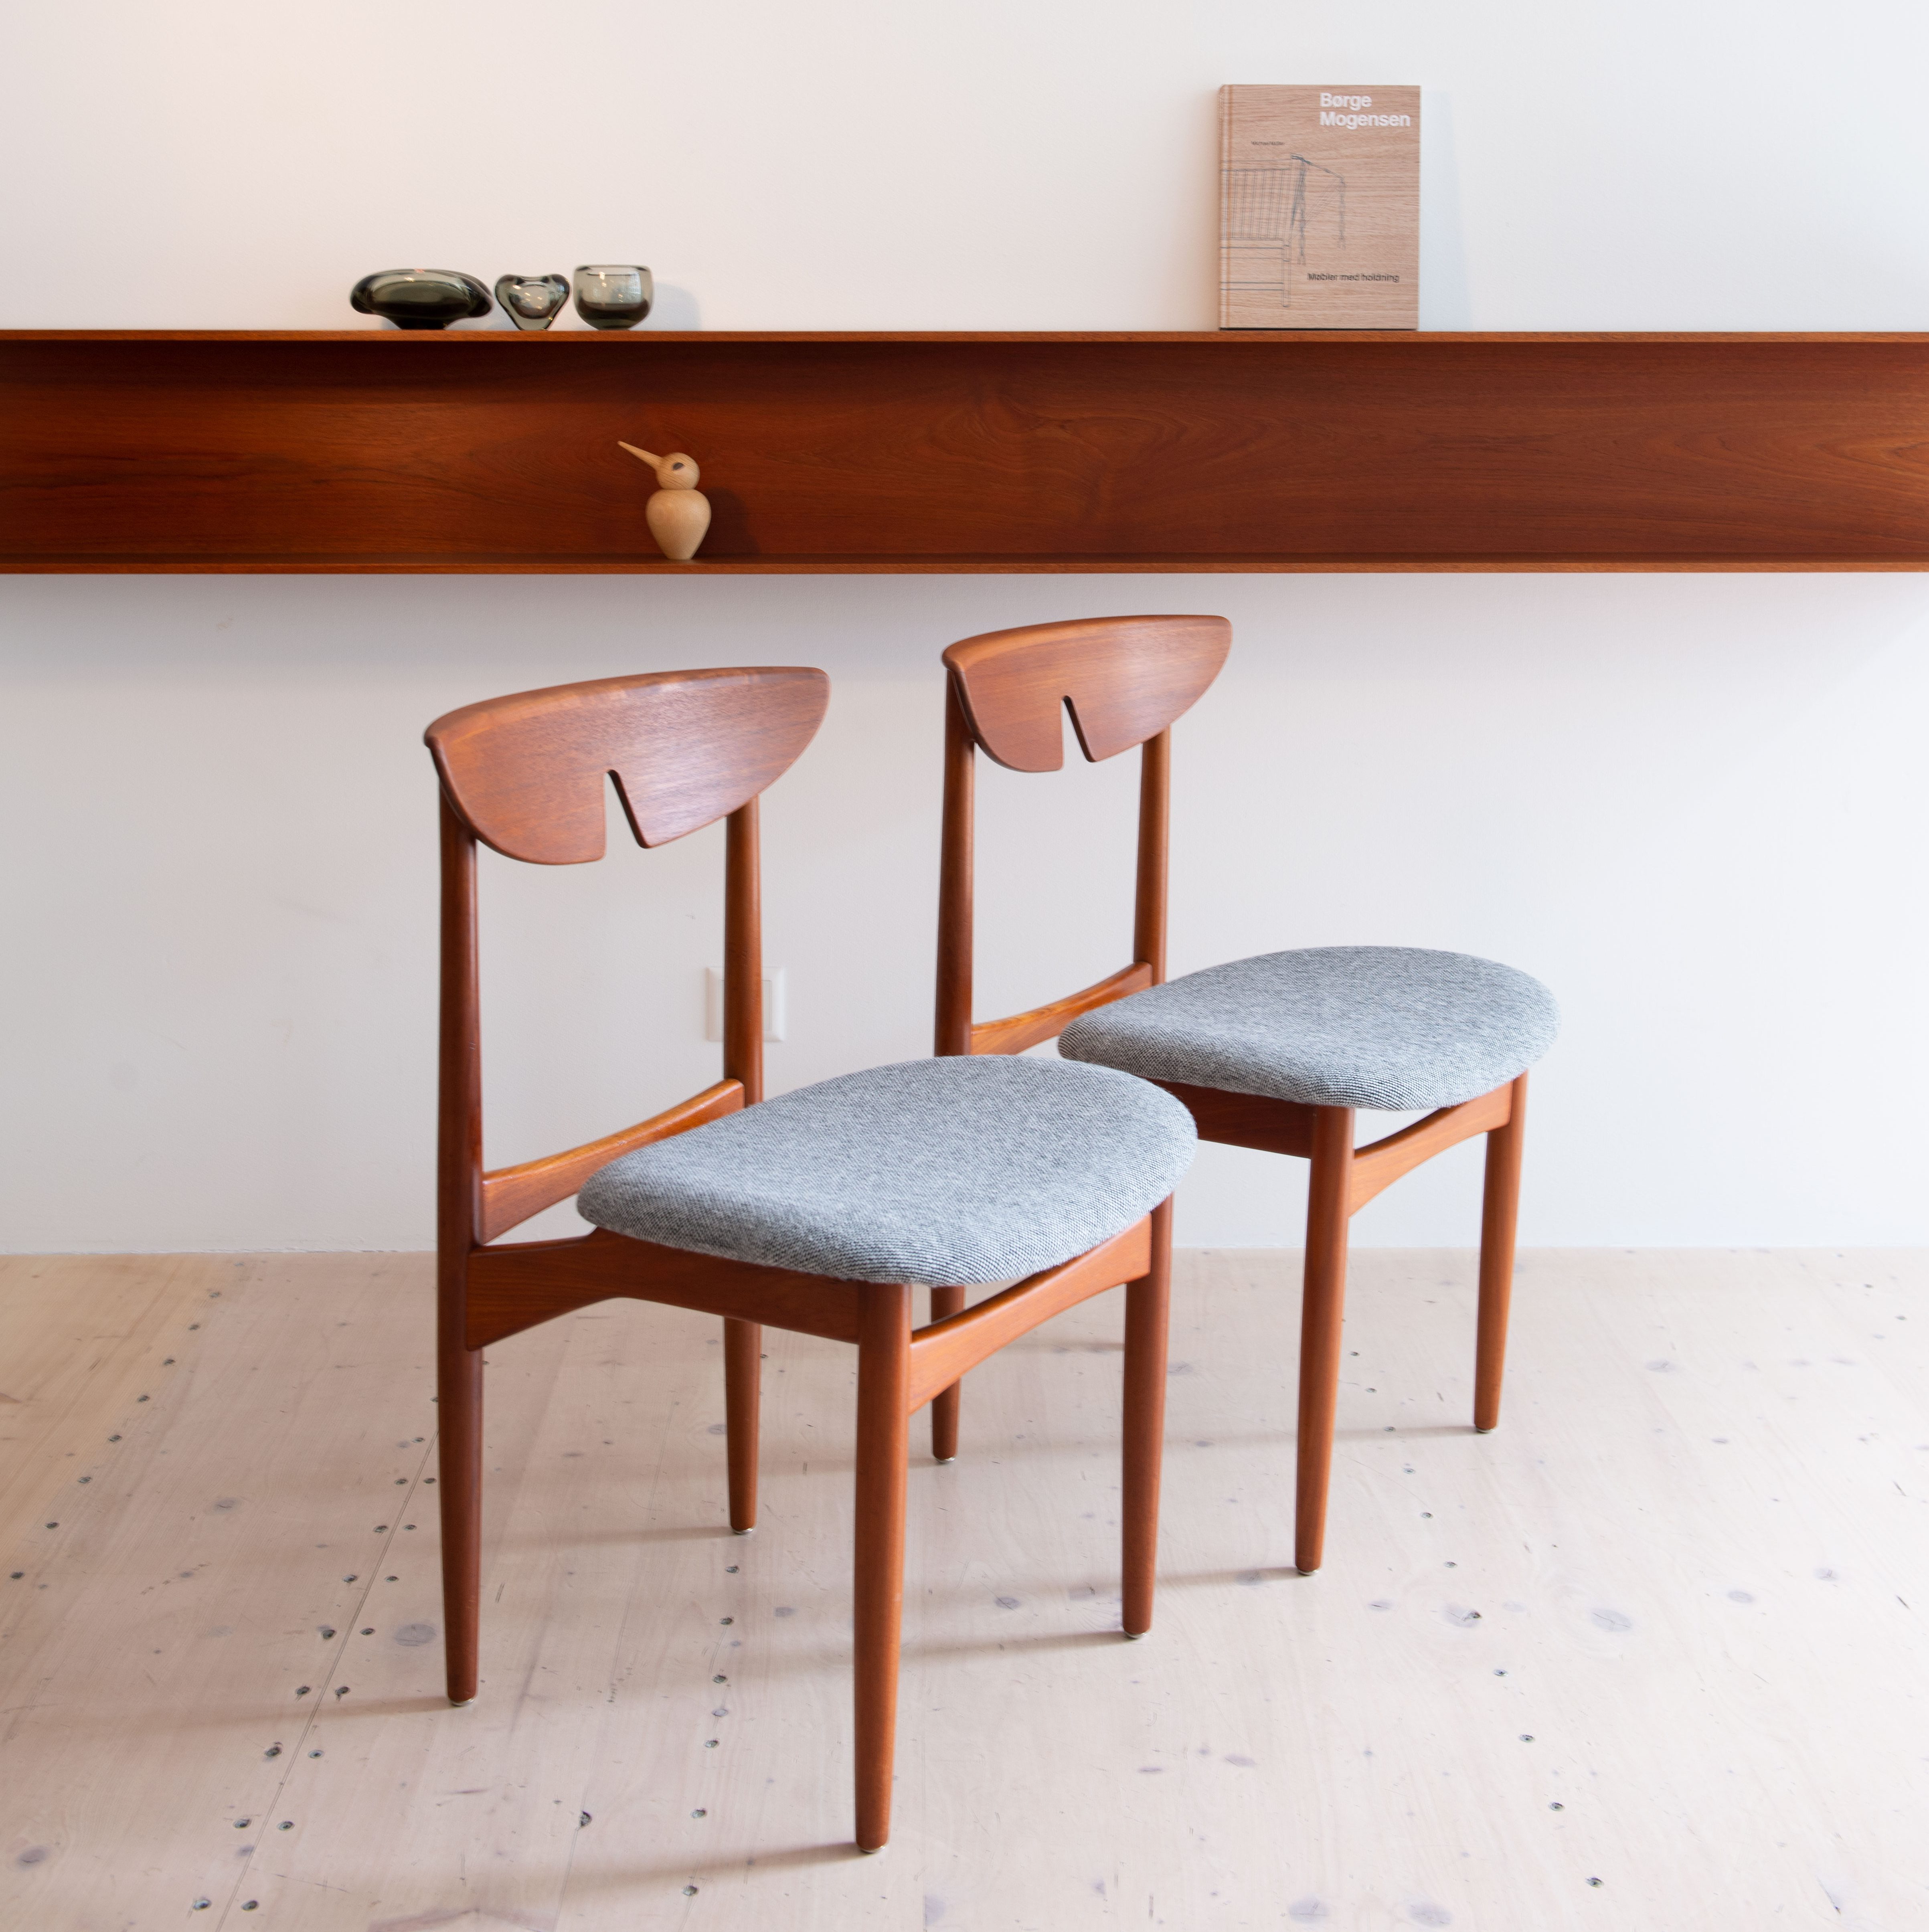 Kurt Ostervig Dining Chair Pair in Teak. Made by KP Möbler in Denmark in the 1960s. Available at heyday möbel. Mid-Century Modern Furniture and Other Stuff in Zürich, Switzerland.